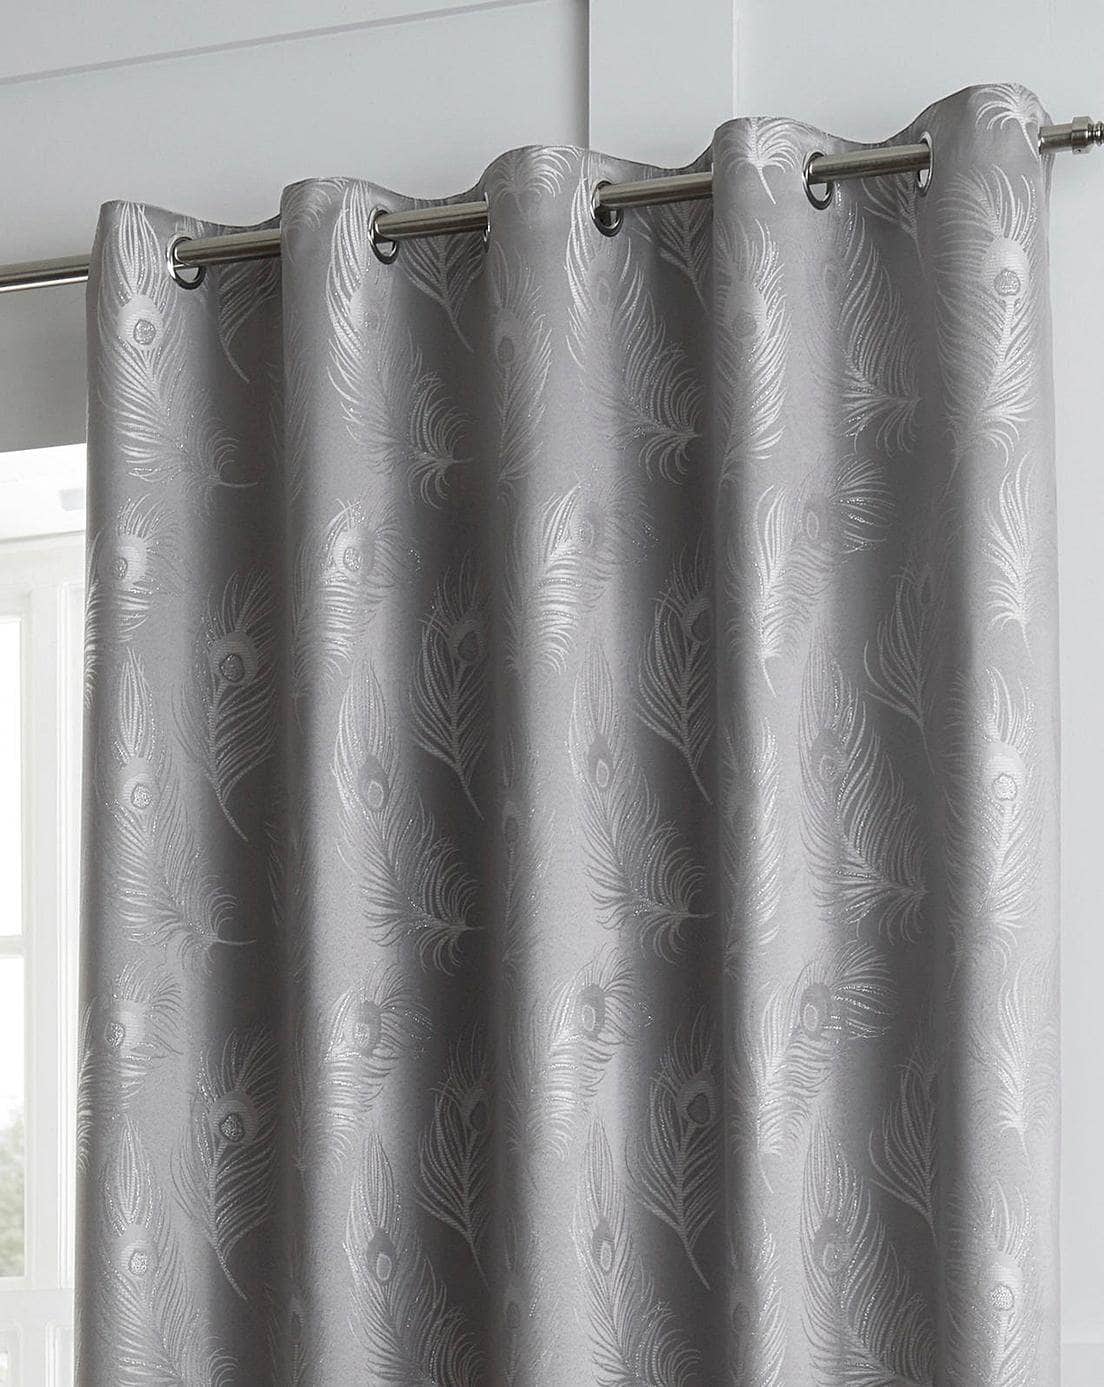  -  Feather Curtains - Silver  - 